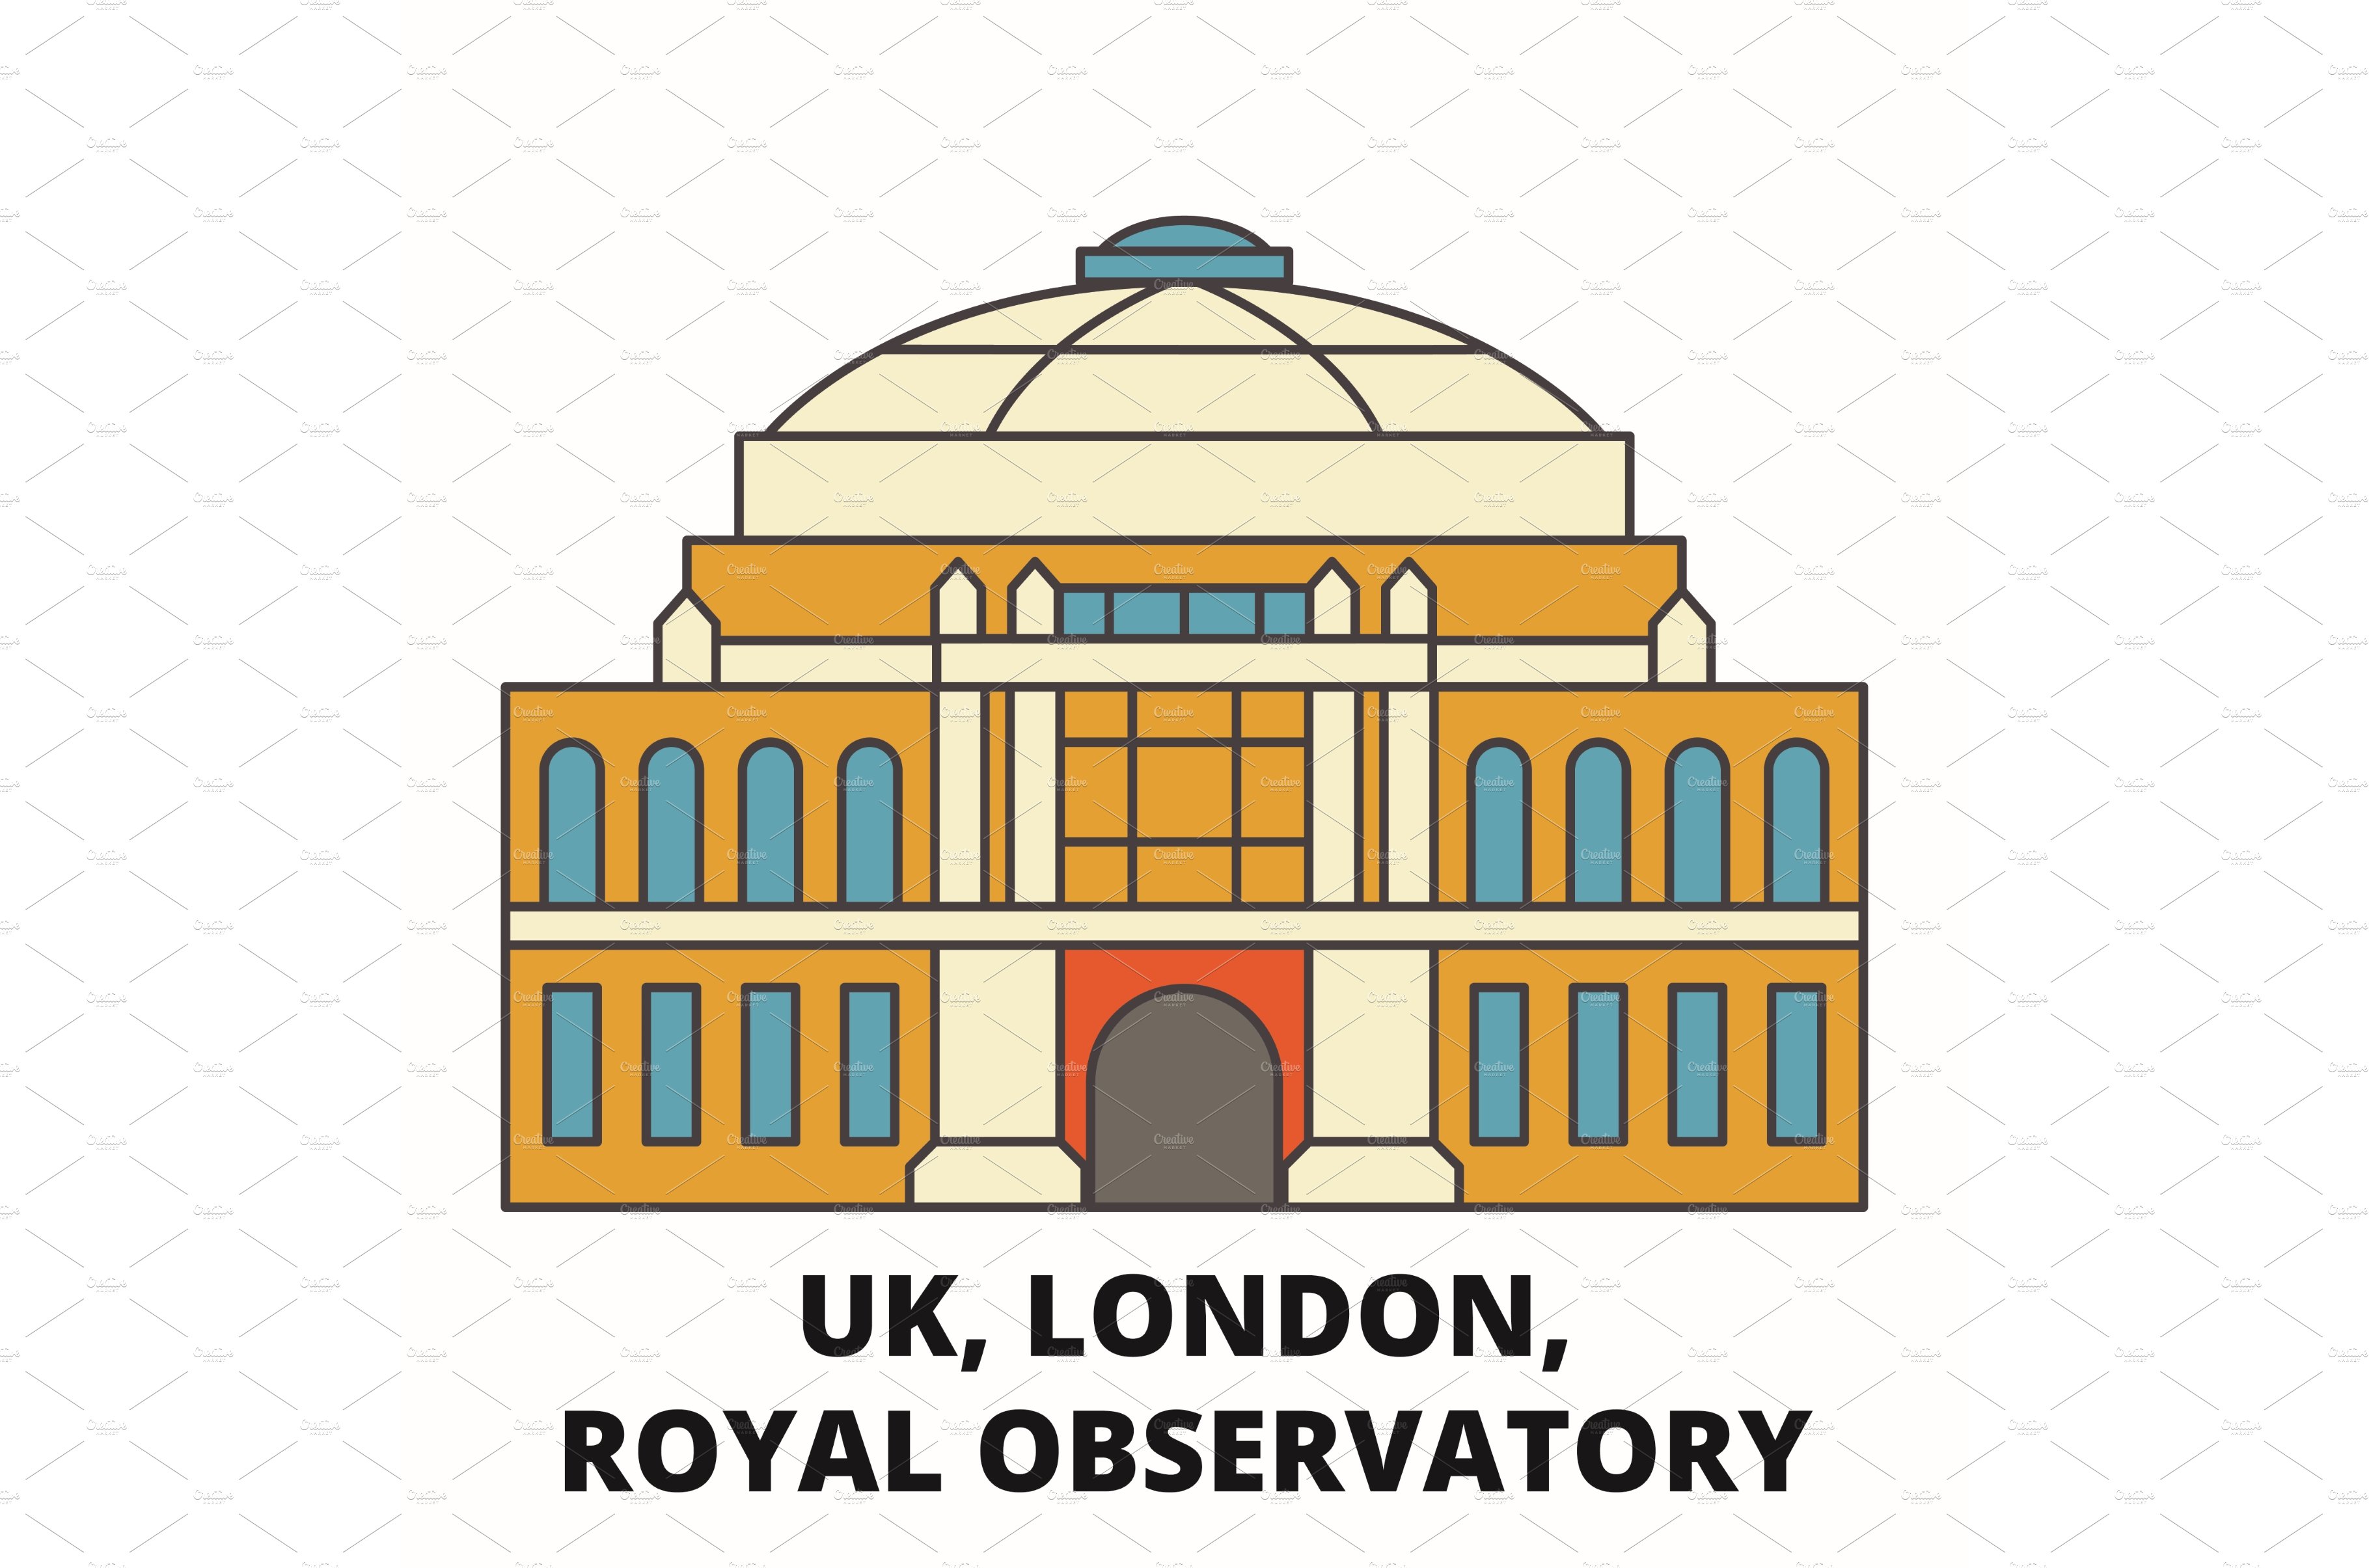 England, London, Royal Observatory cover image.